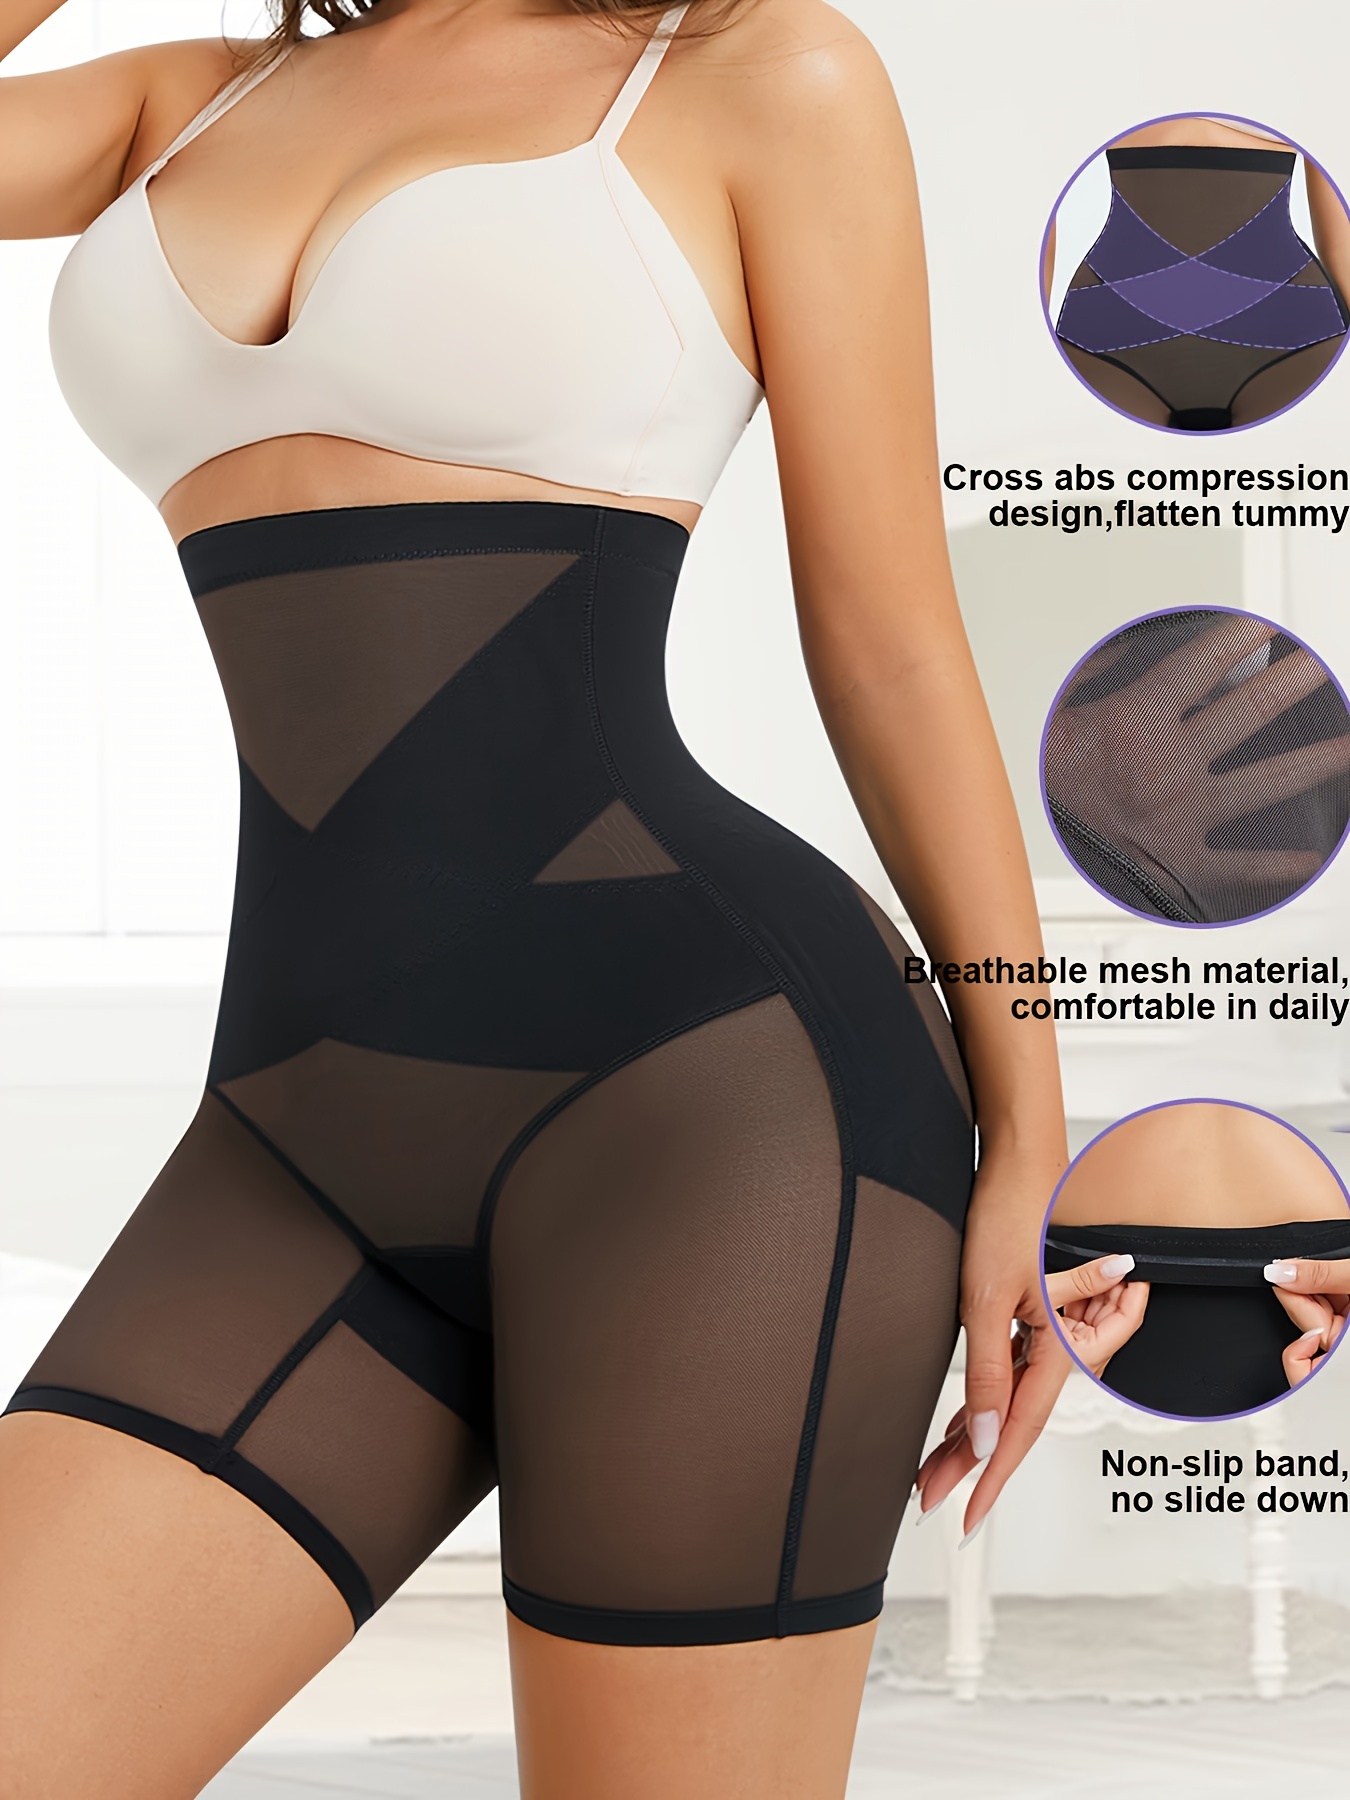 Womens Shapers Cross Compression Abs Booty High Waisted Shaper